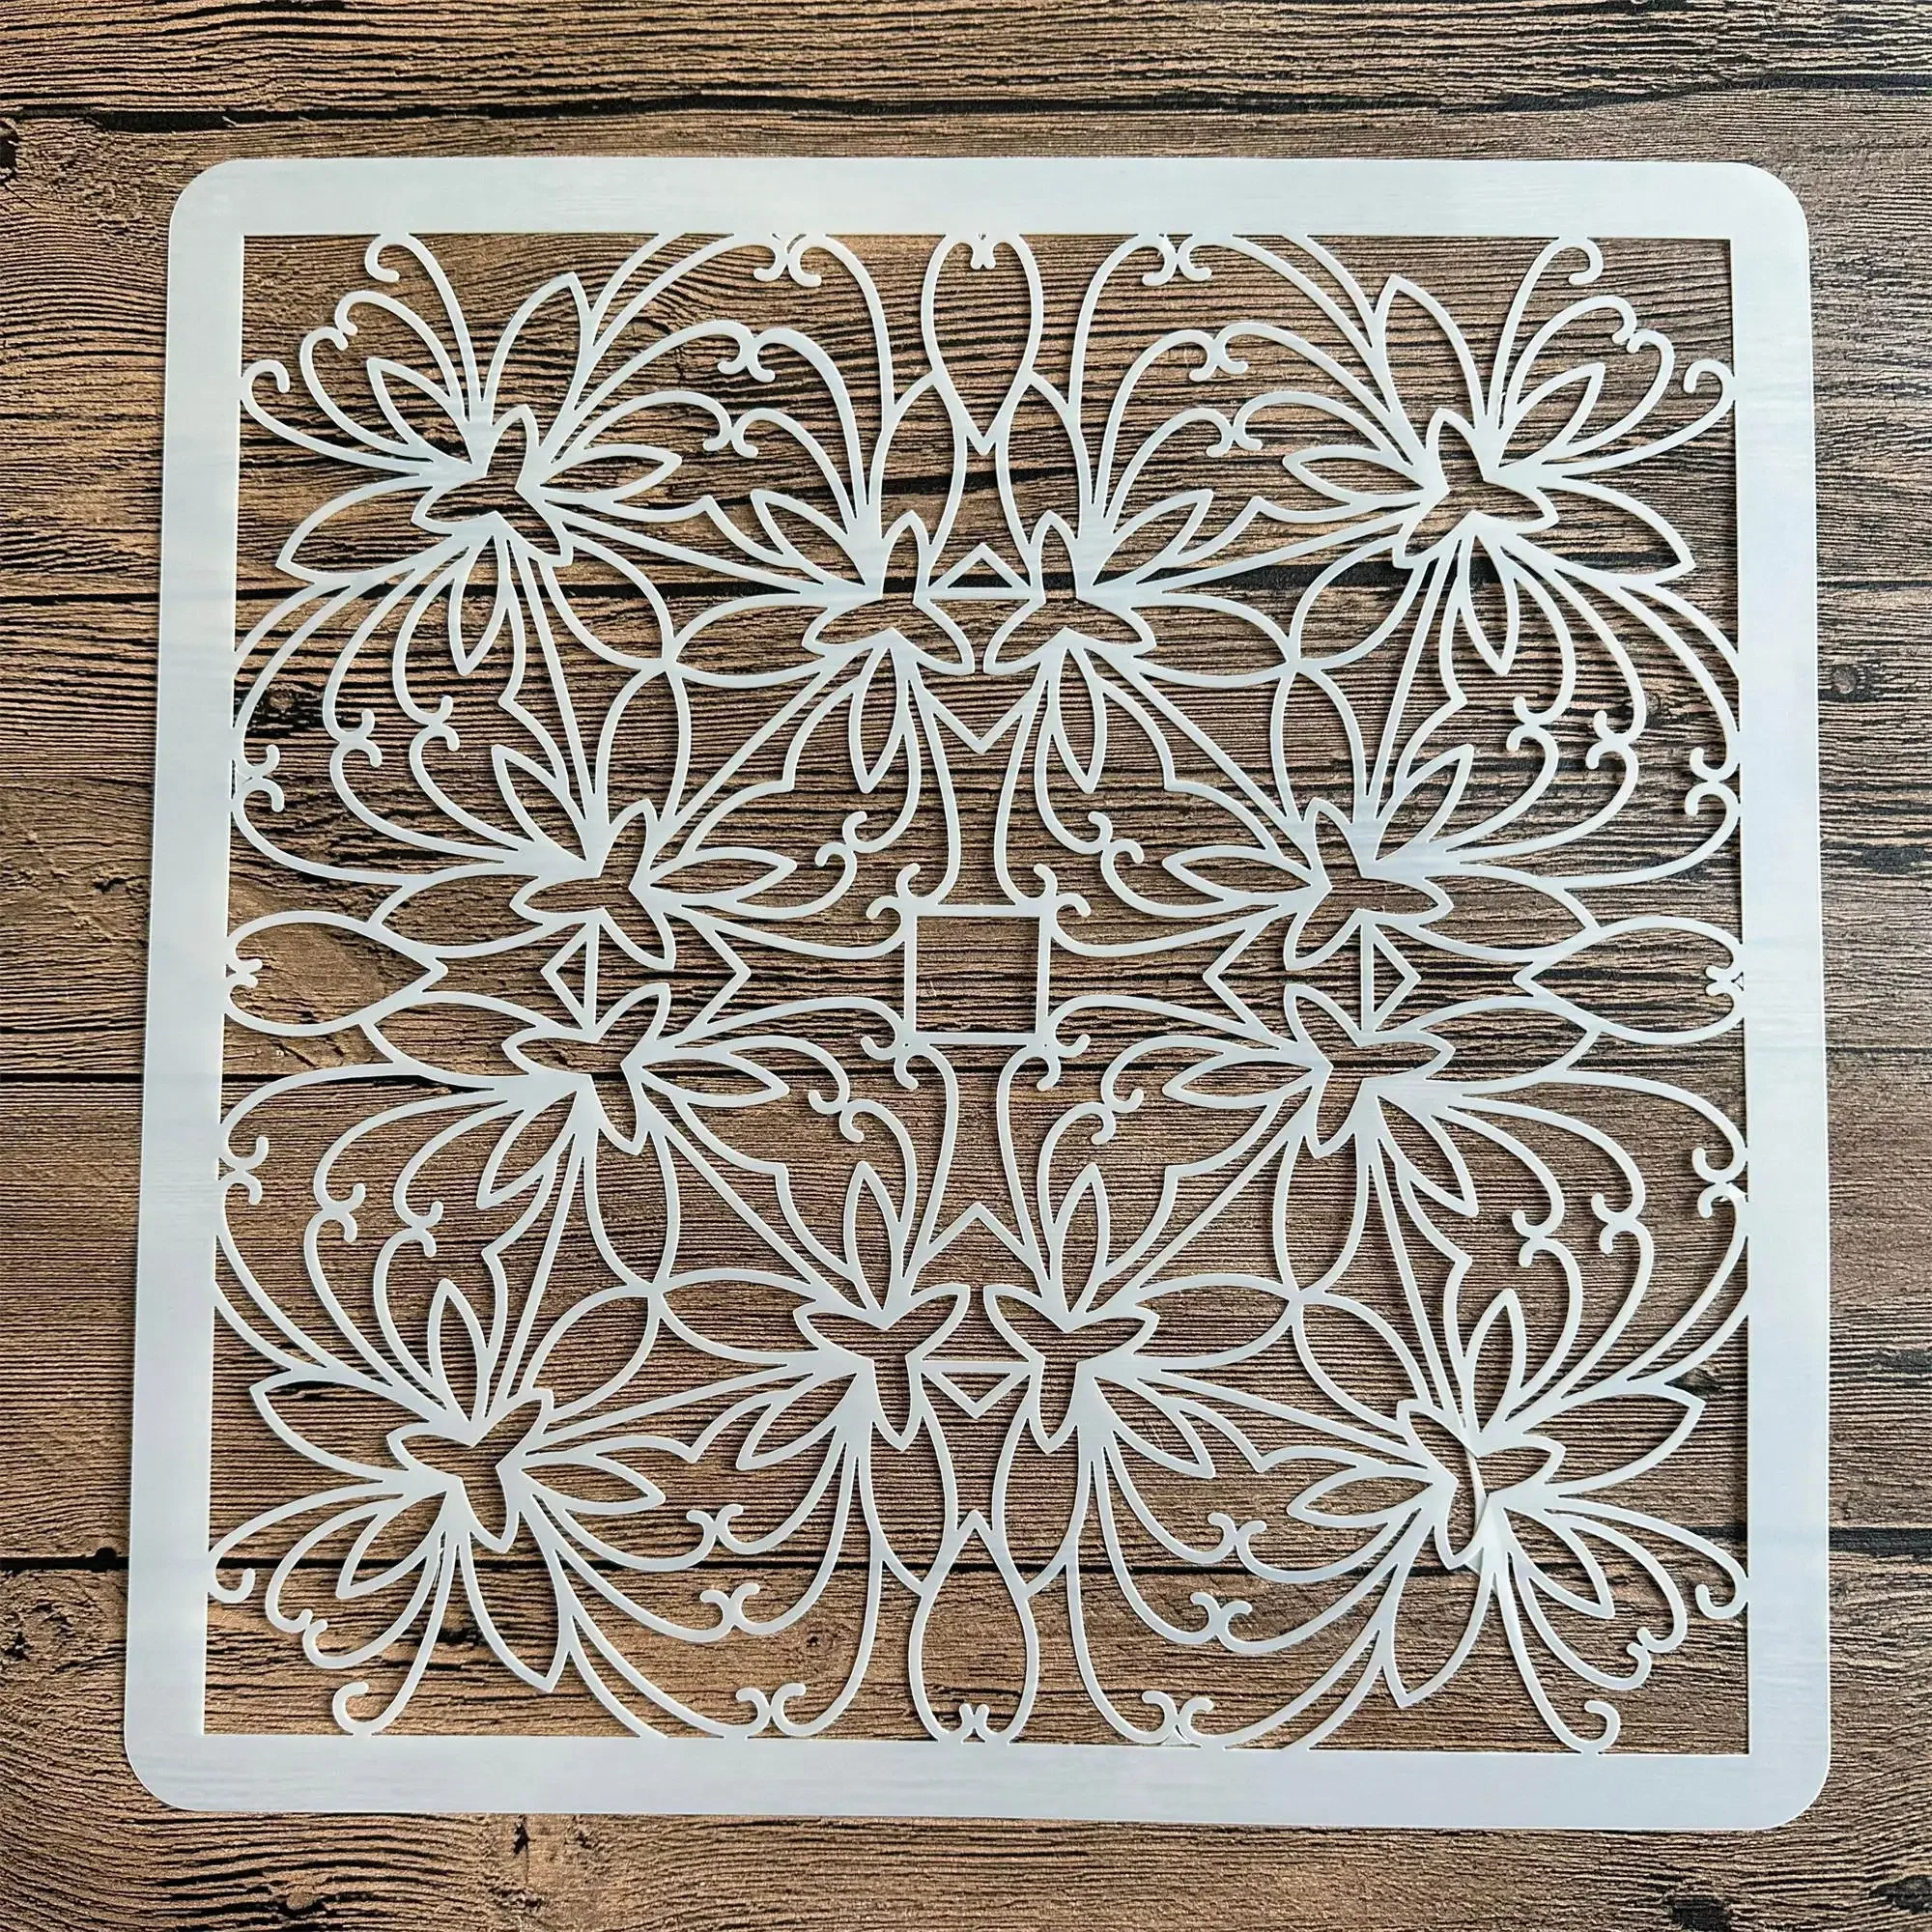 Mandala stencils diy mold for painting stencils stamped photo album embossed paper card on wood, fabric,wall 30 * 30cm size custom custom letterpress printing gallery cards new 500gsm business card embossed paper